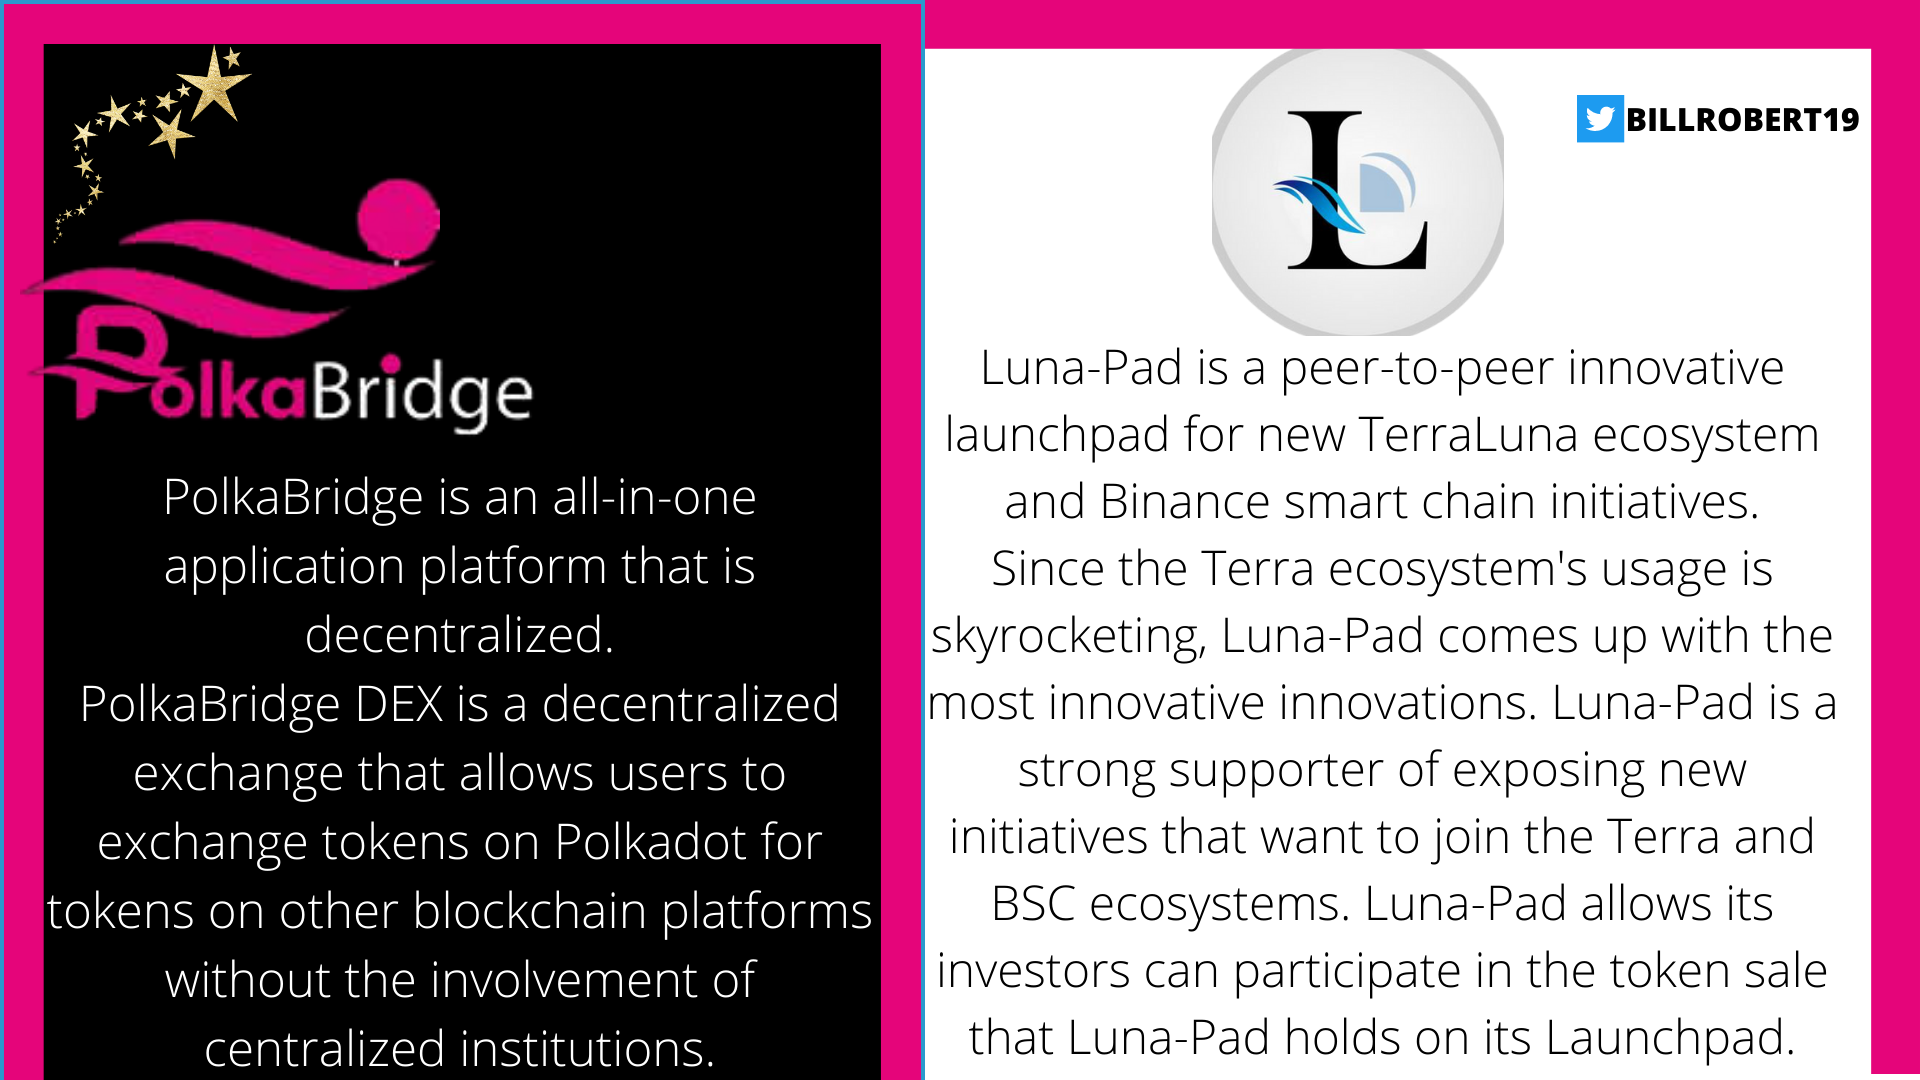 Luna-Pad is a peer-to-peer innovative launchpad for new TerraLuna ecosystem and Binance smart chain initiatives. Since the Terra ecosystem's usage is skyrocketing, Luna-Pad comes up with the most innovative innovatio.png